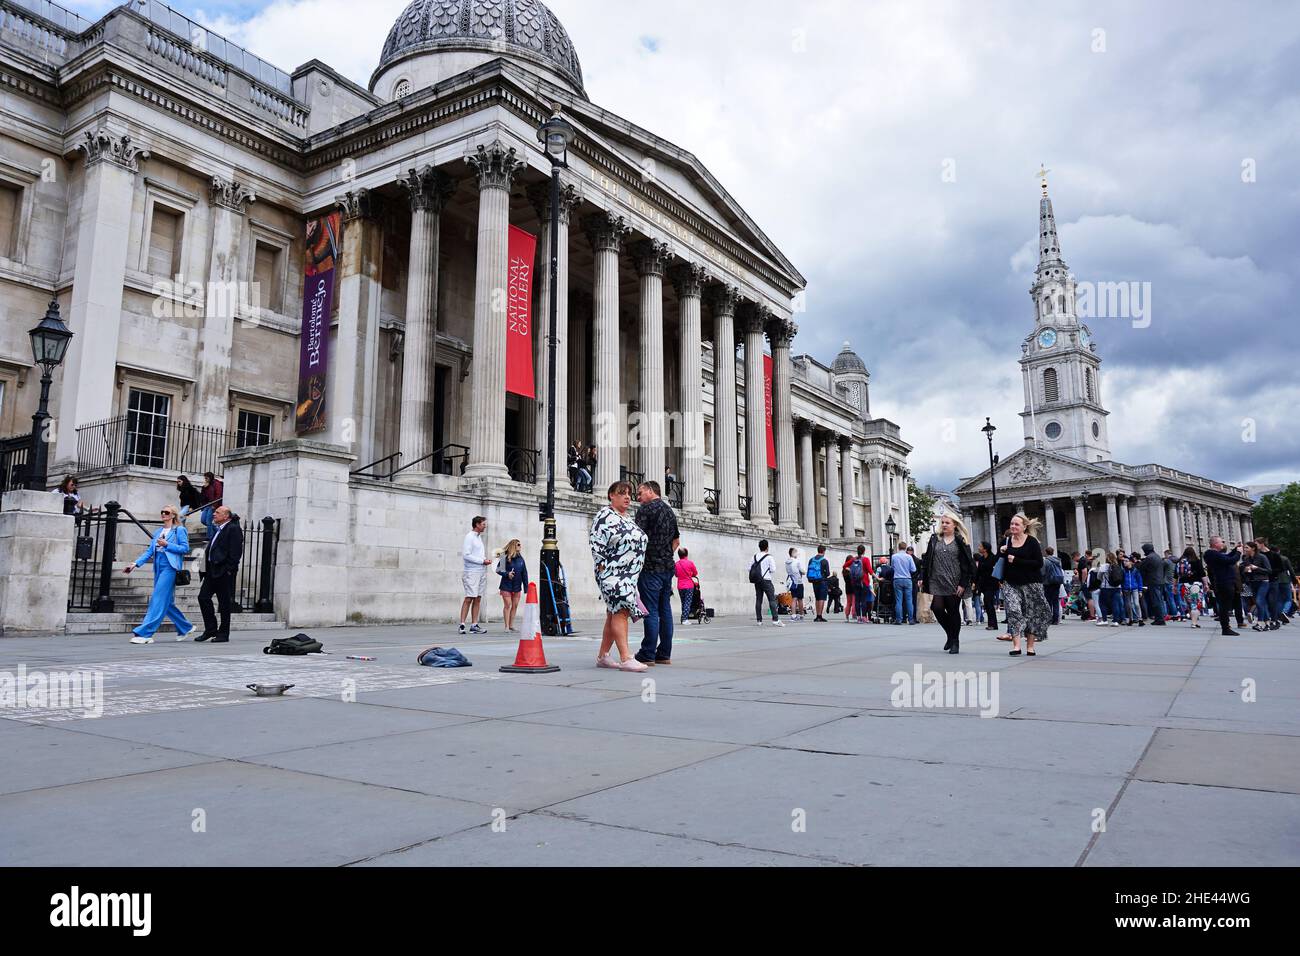 Tourists walking in front of the National Gallery, art museum in Trafalgar Square, Westminster Stock Photo